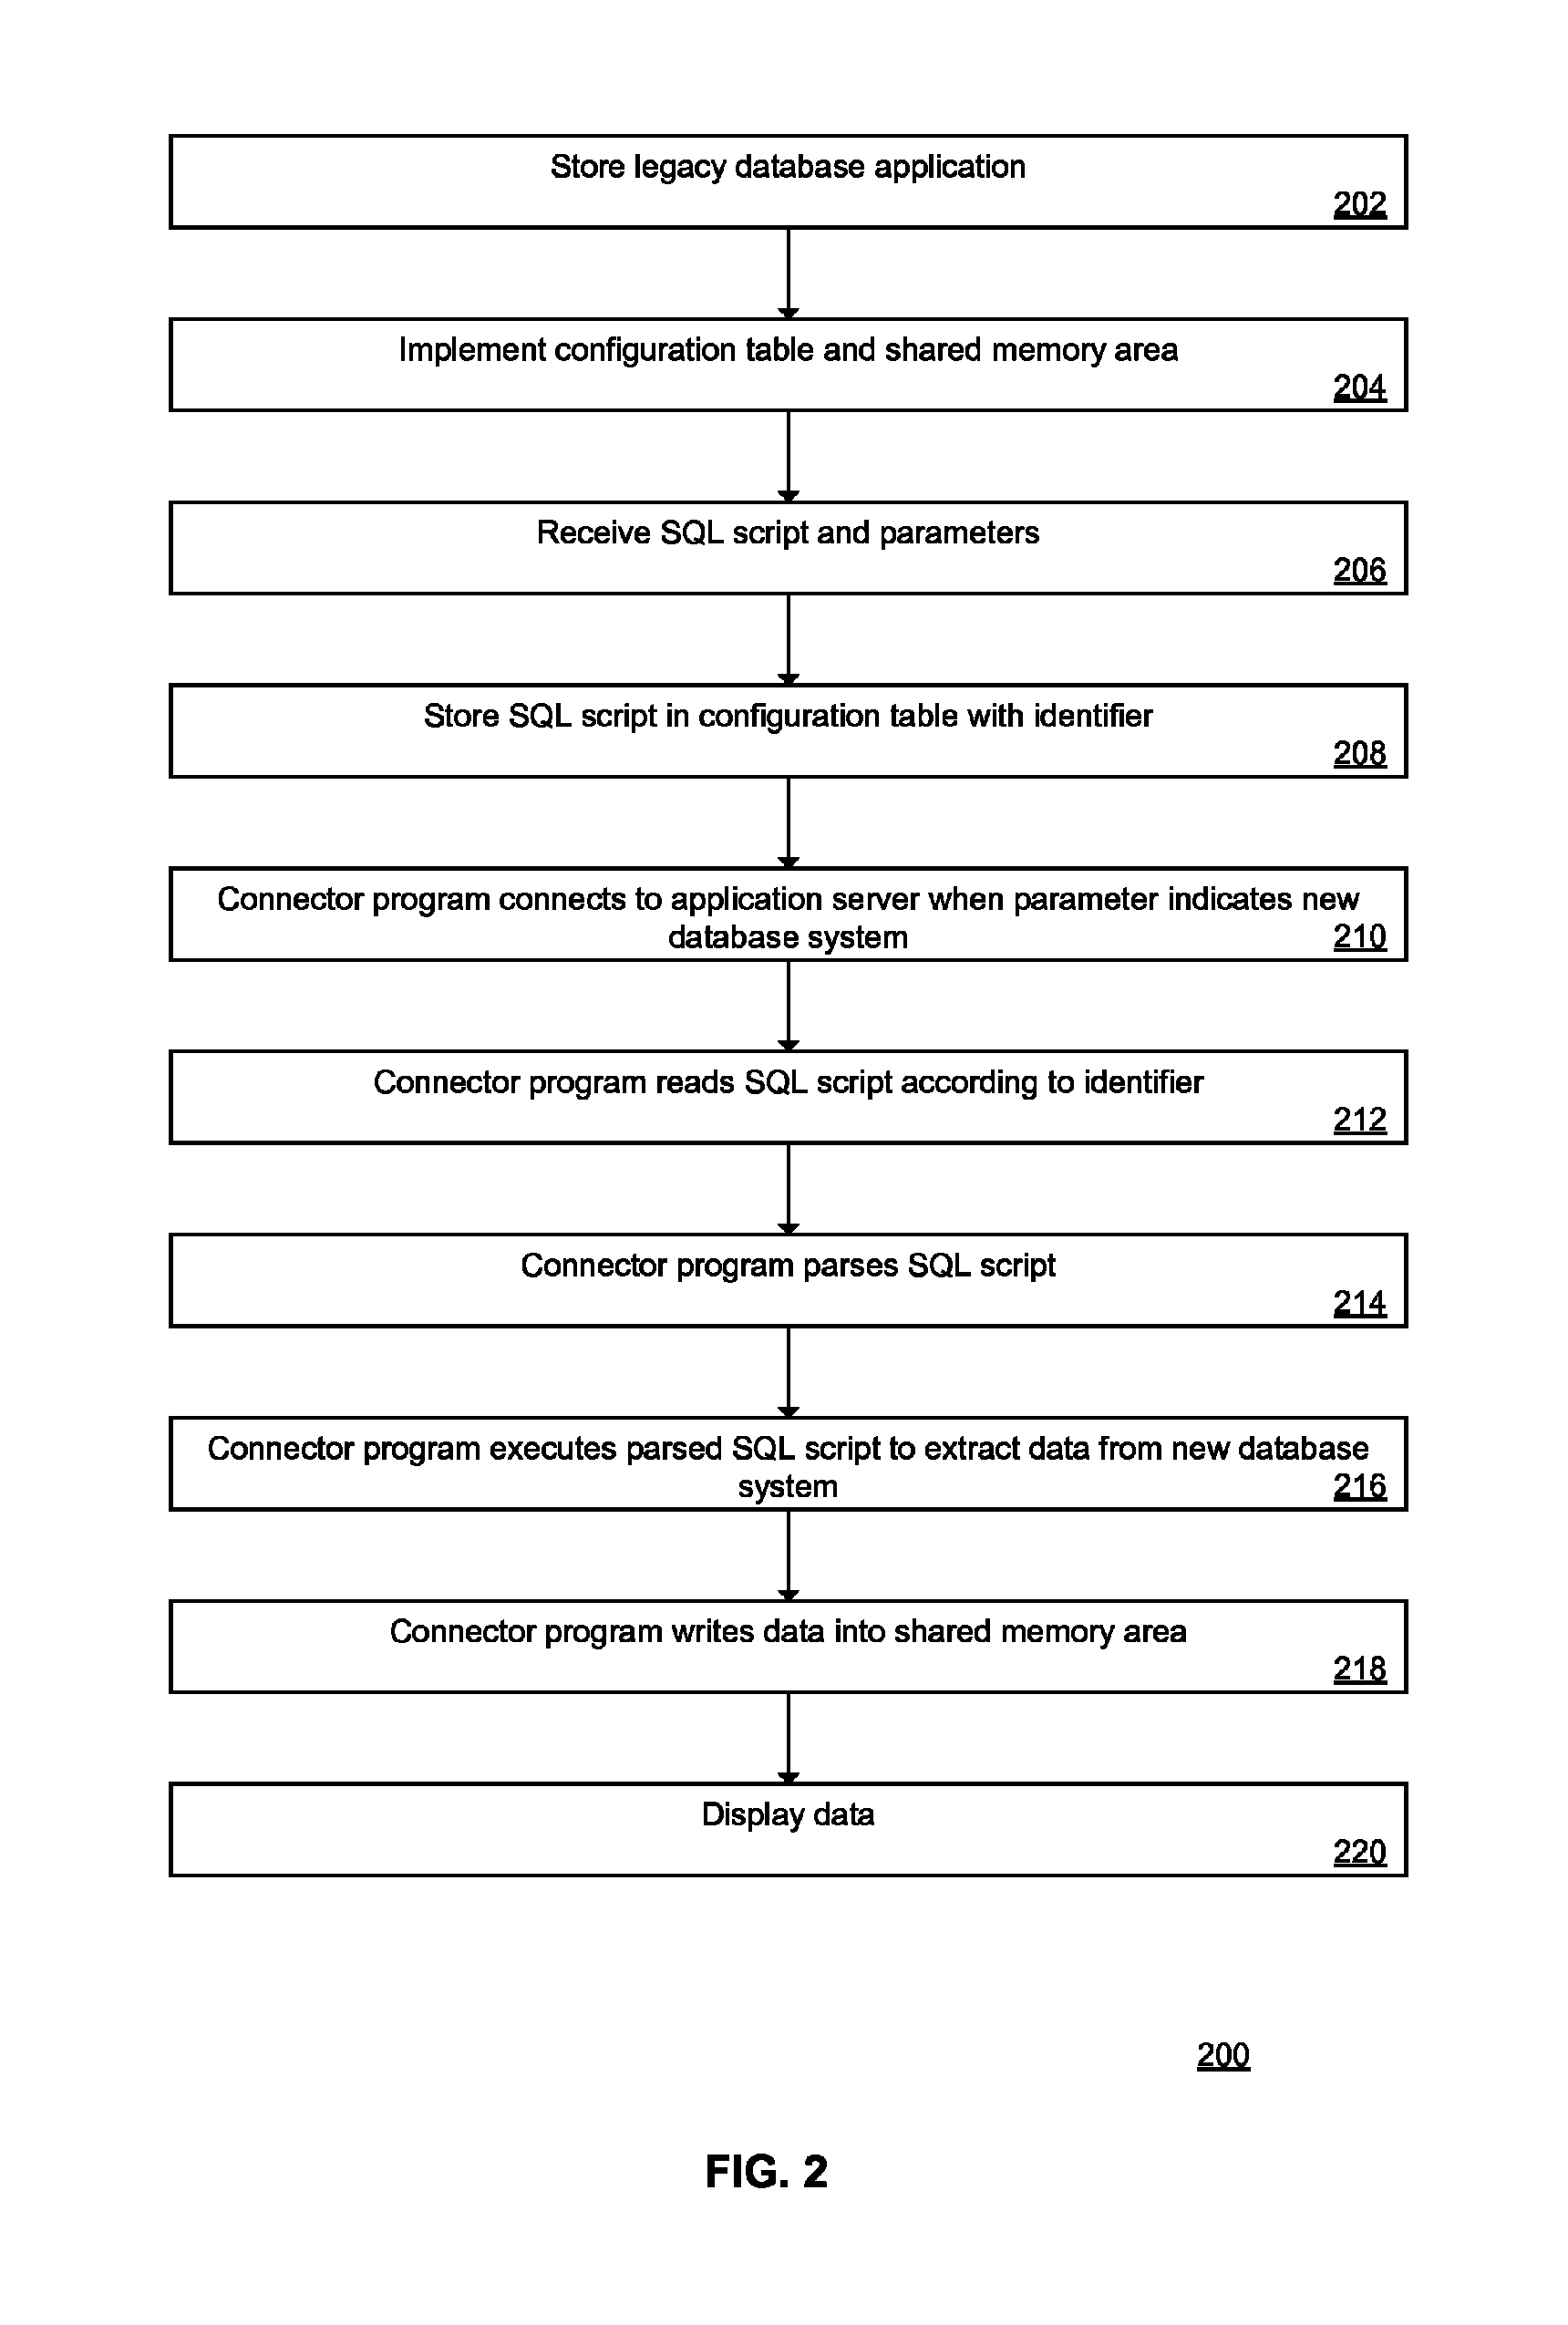 System and method of connecting legacy database applications and new database systems